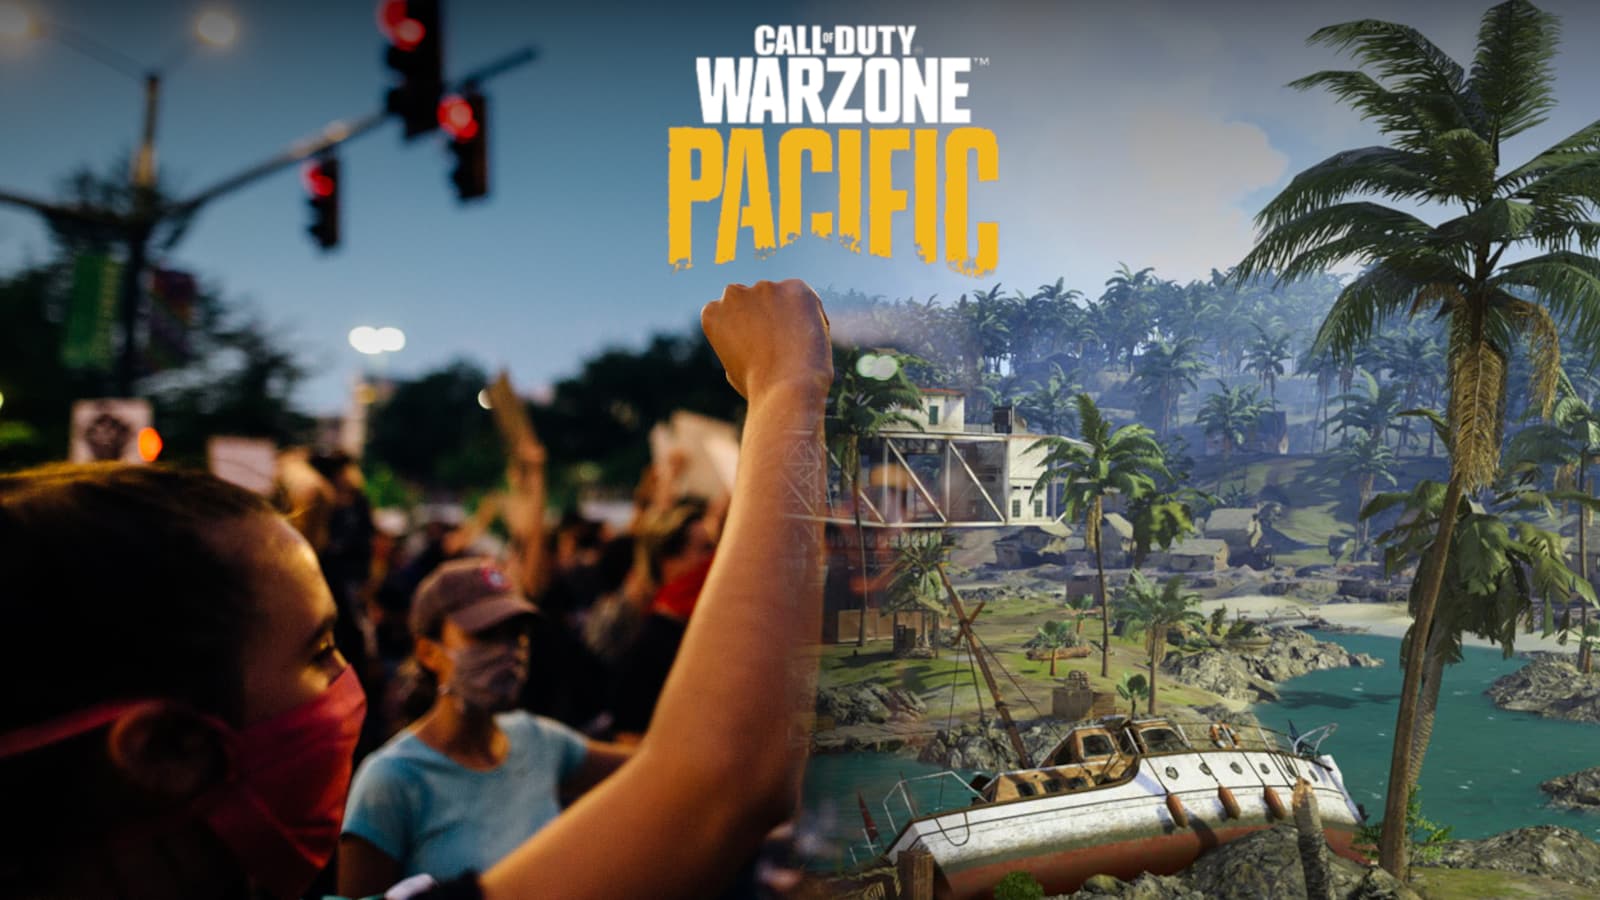 call of duty warzone pacific protest